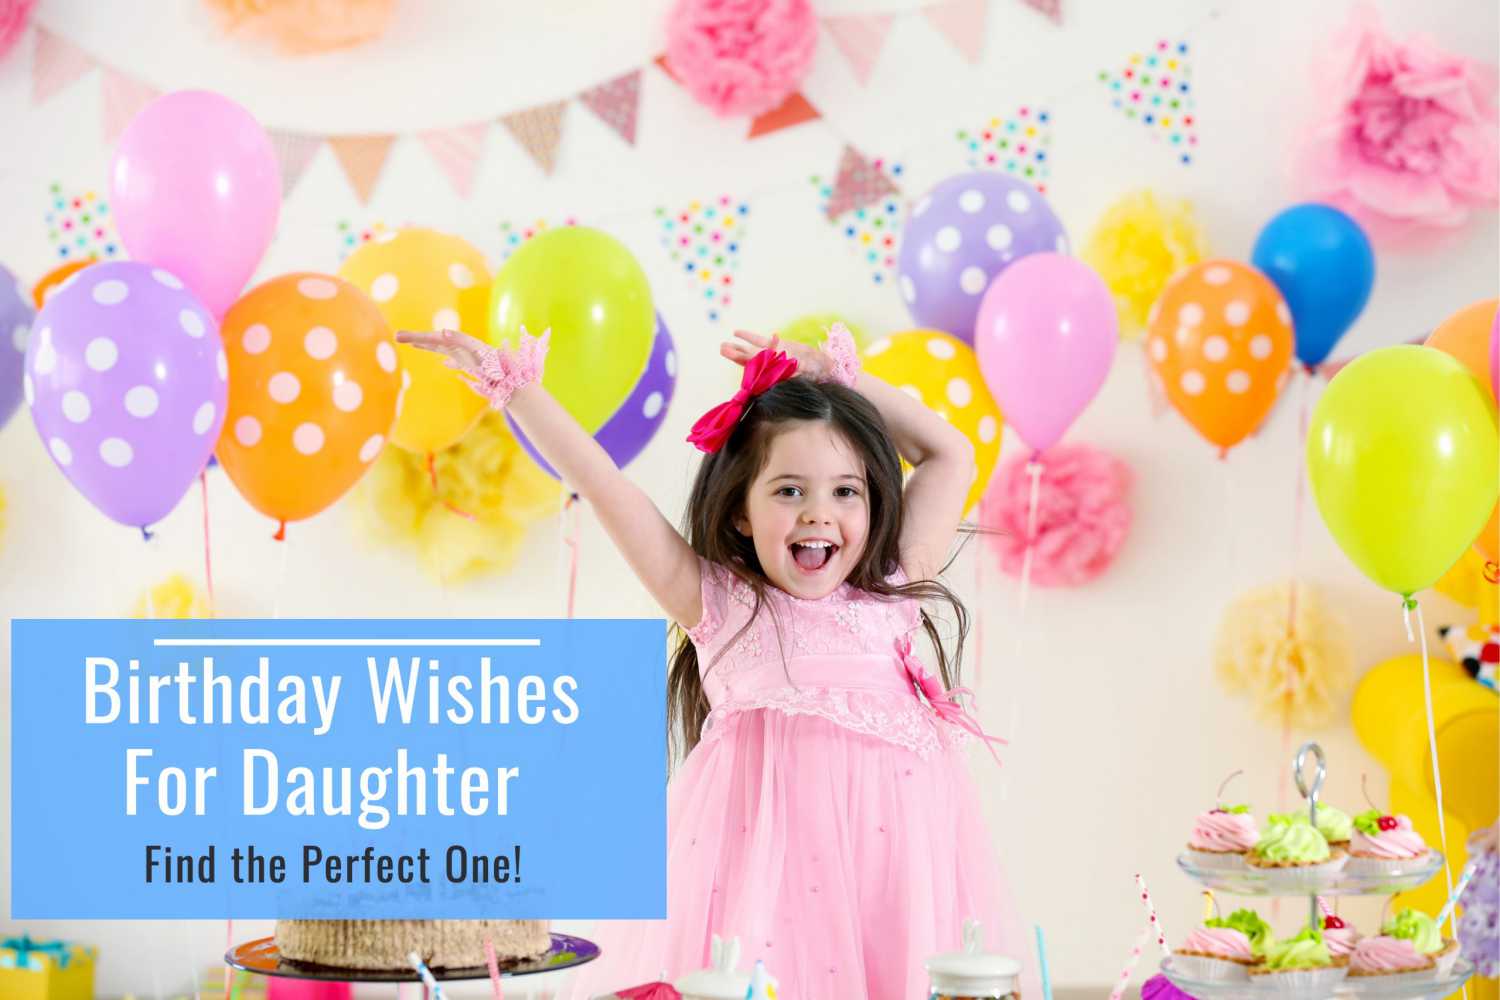 Birthday Wishes For Daughter – Find the Perfect One!